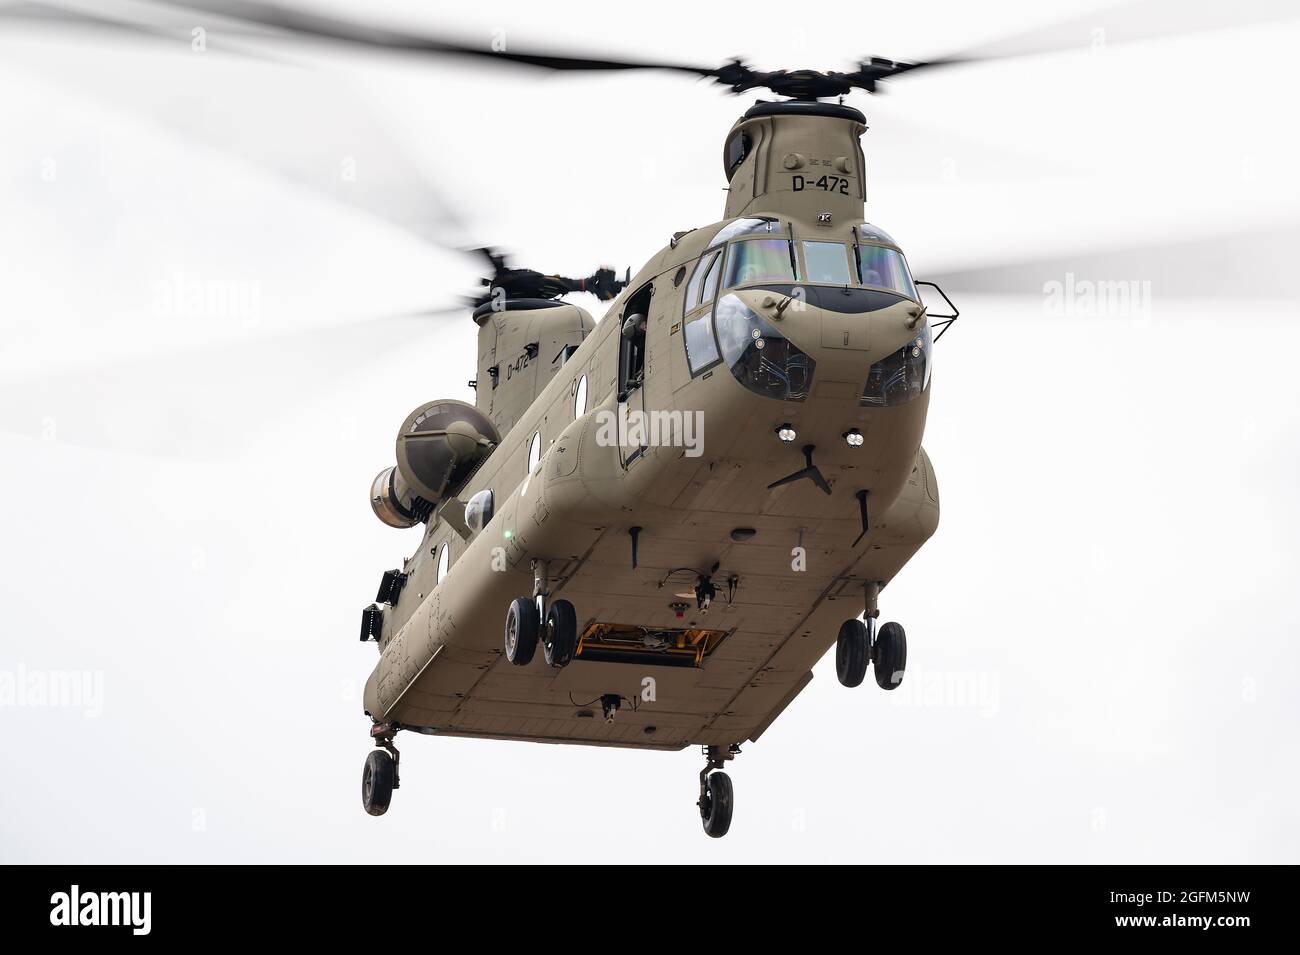 A Boeing CH-47F Chinook transport helicopter of the Royal Netherlands Air Force training at the GLV5 low flying aera. Stock Photo